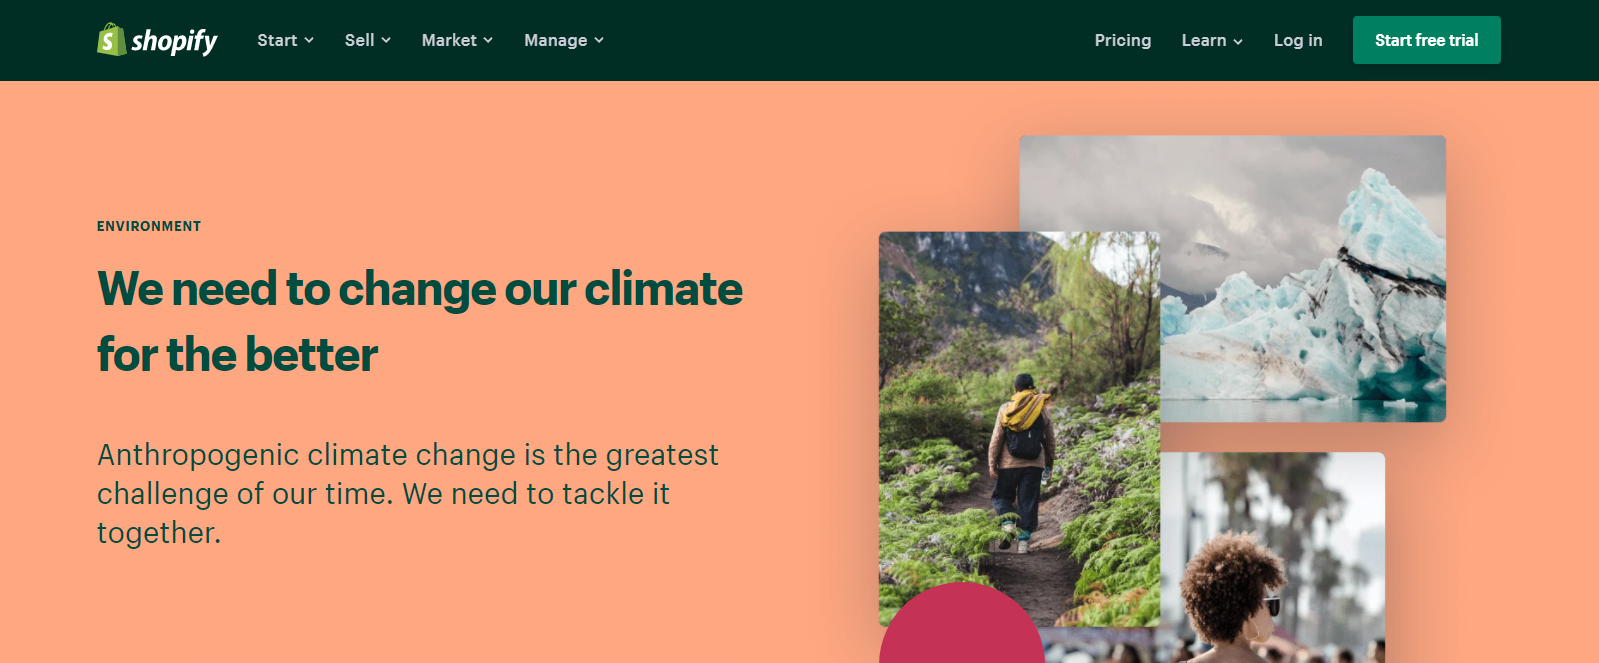 A screenshot of Shopify's website highlighting their environmental commitments, including in relation to Shop Pay